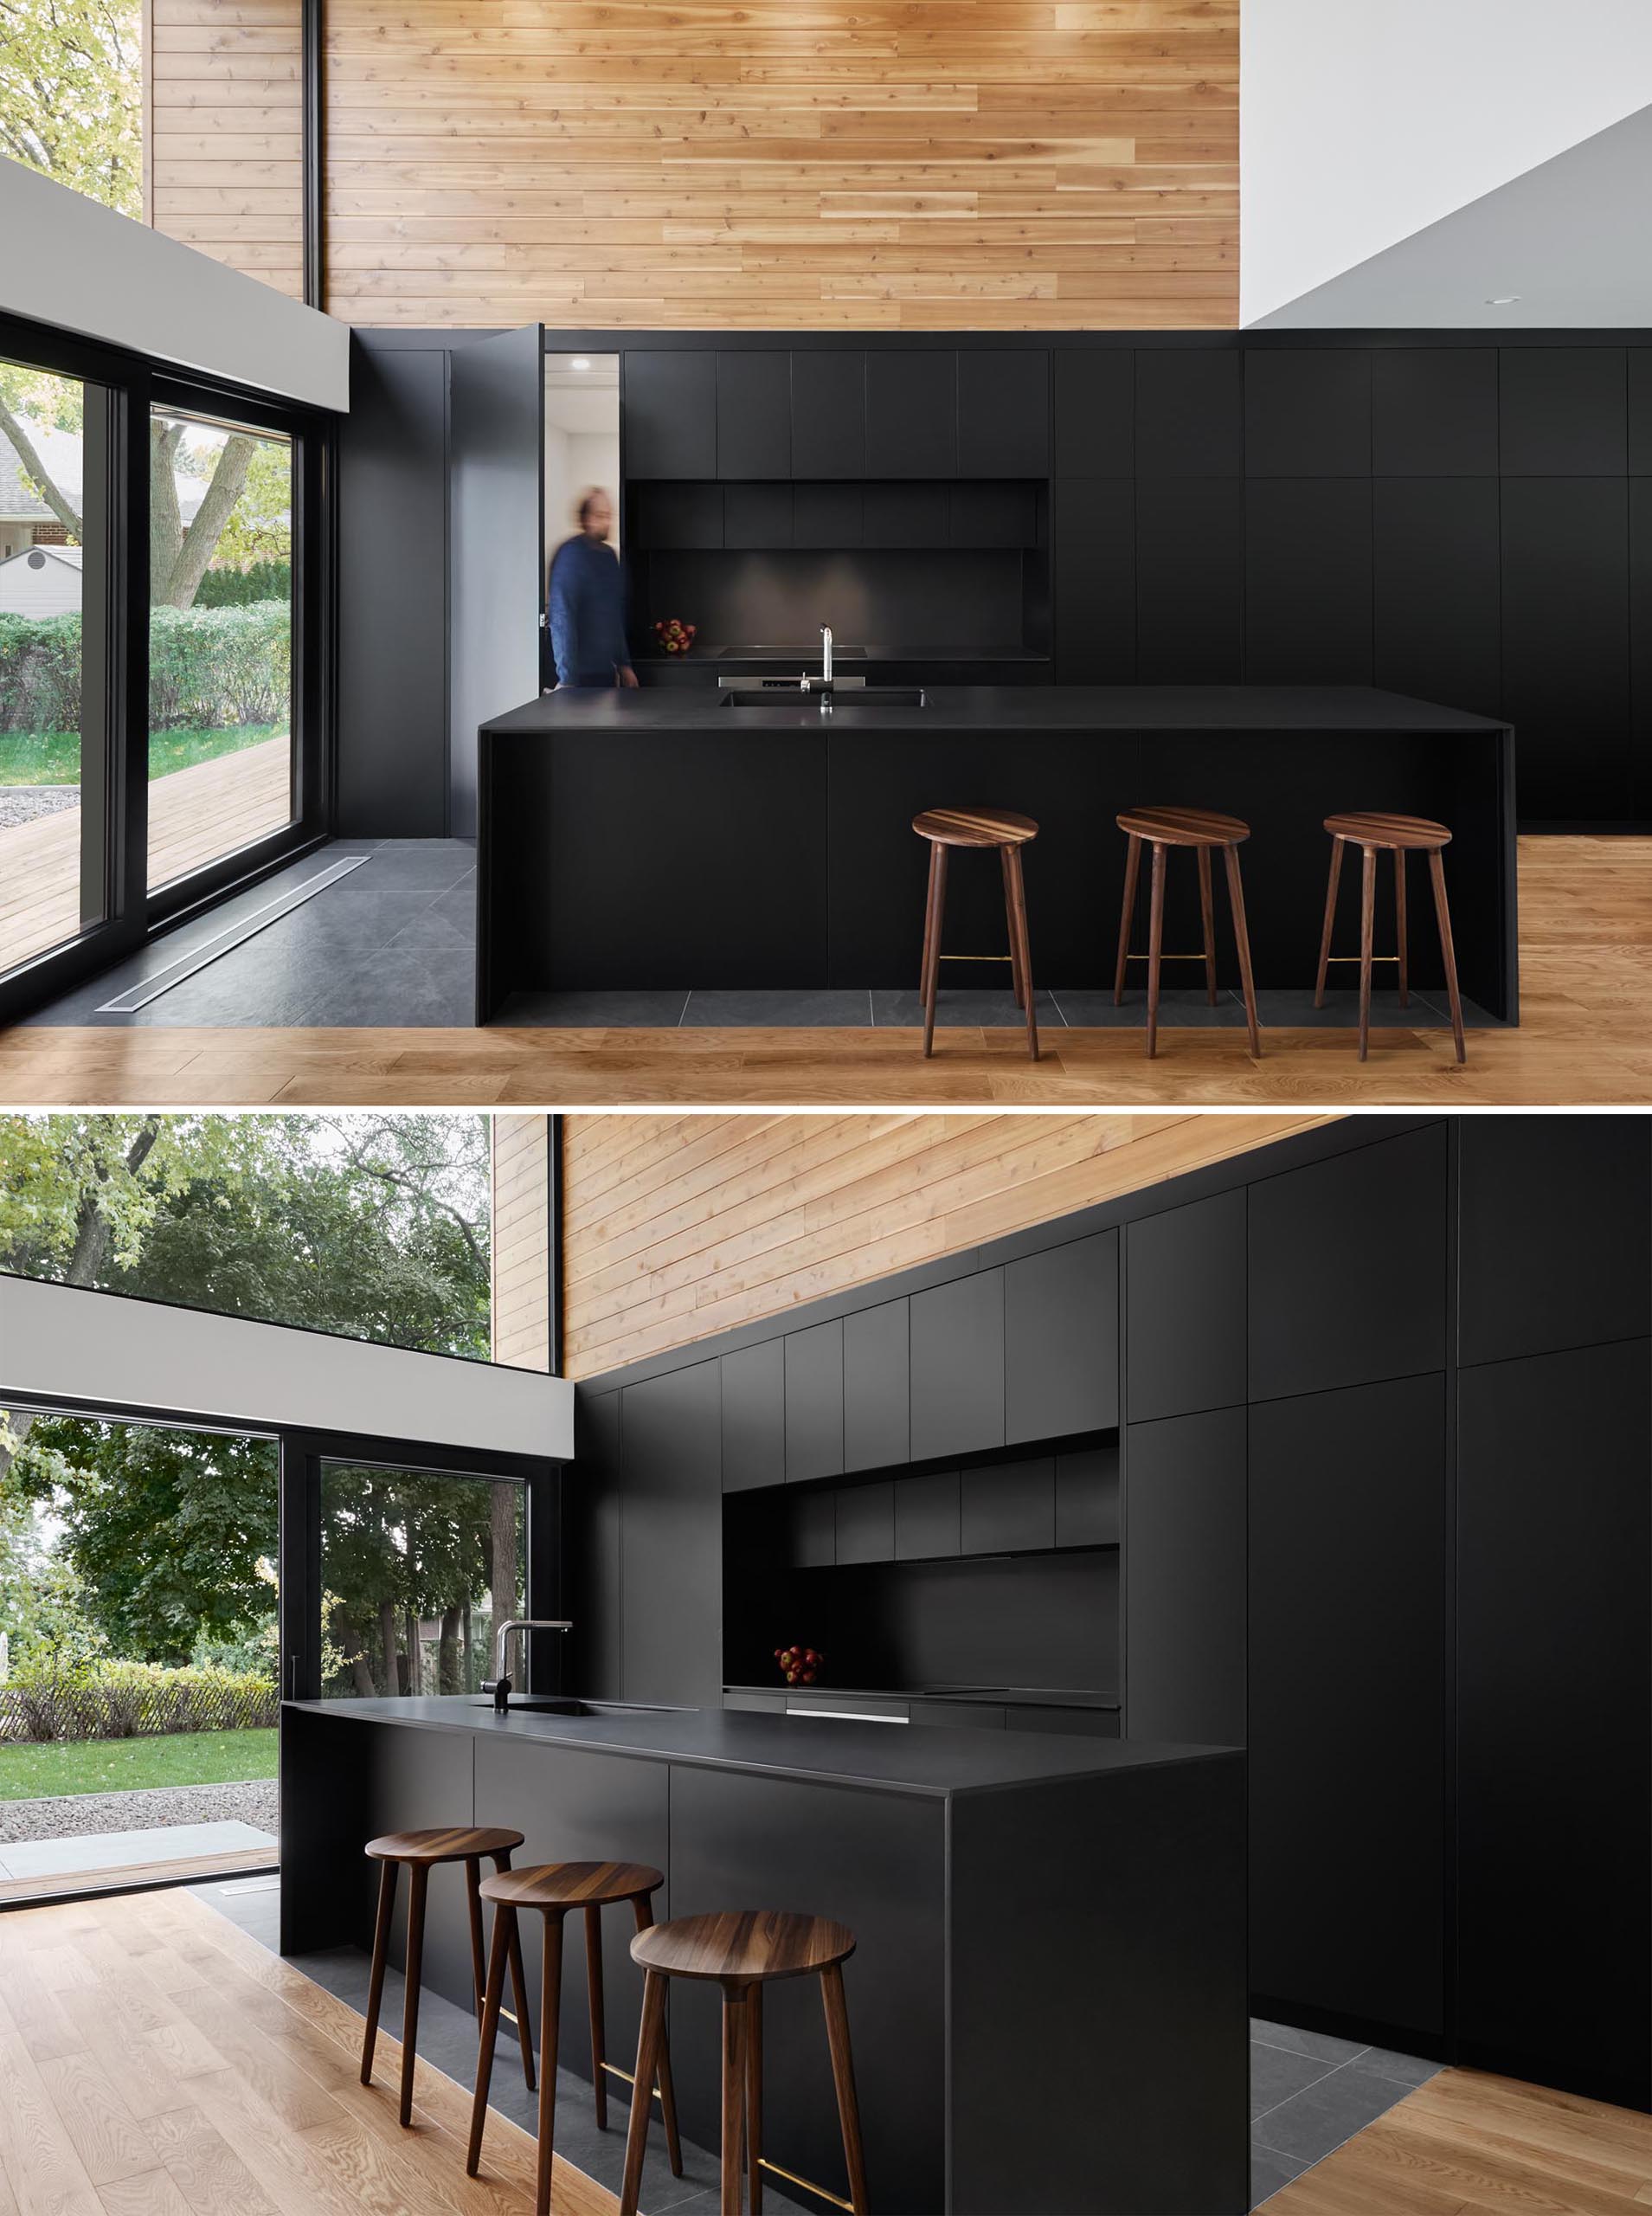 A Black Kitchen Is A Bold Design Decision For The Interior Of This  Remodeled 1960s Home